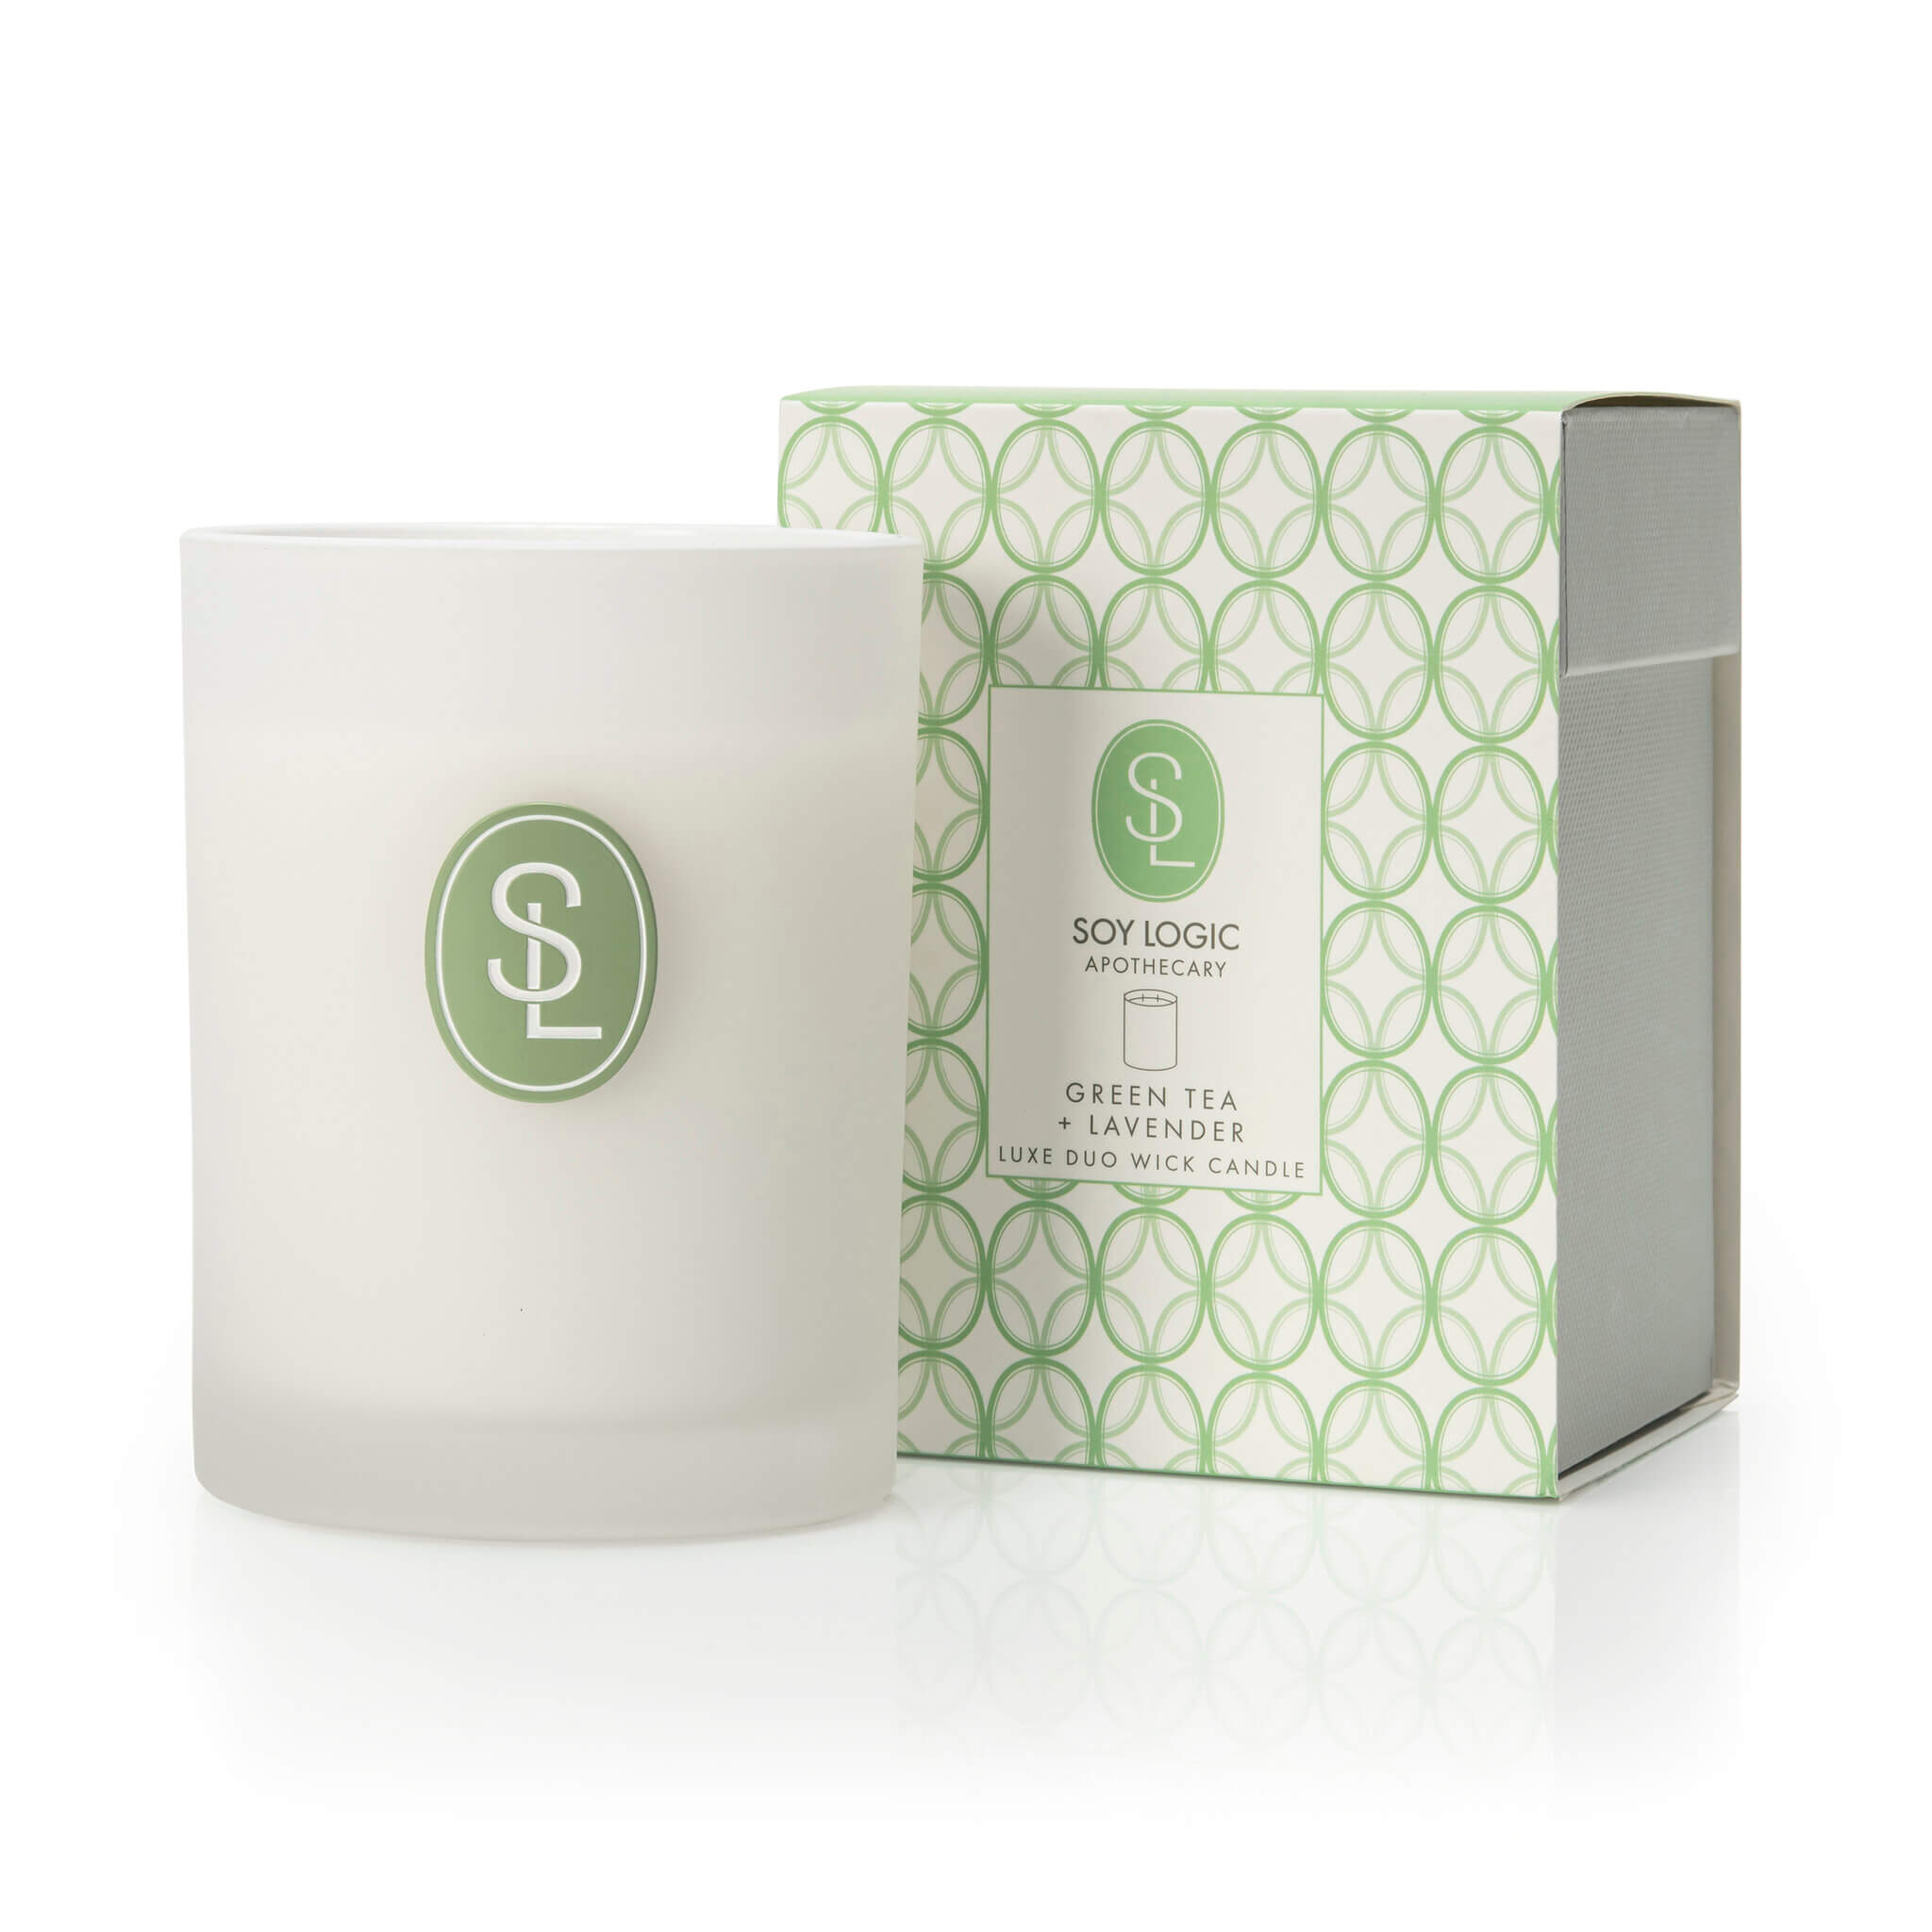 Green Tea & Lavender Classic Duo Wick Candle